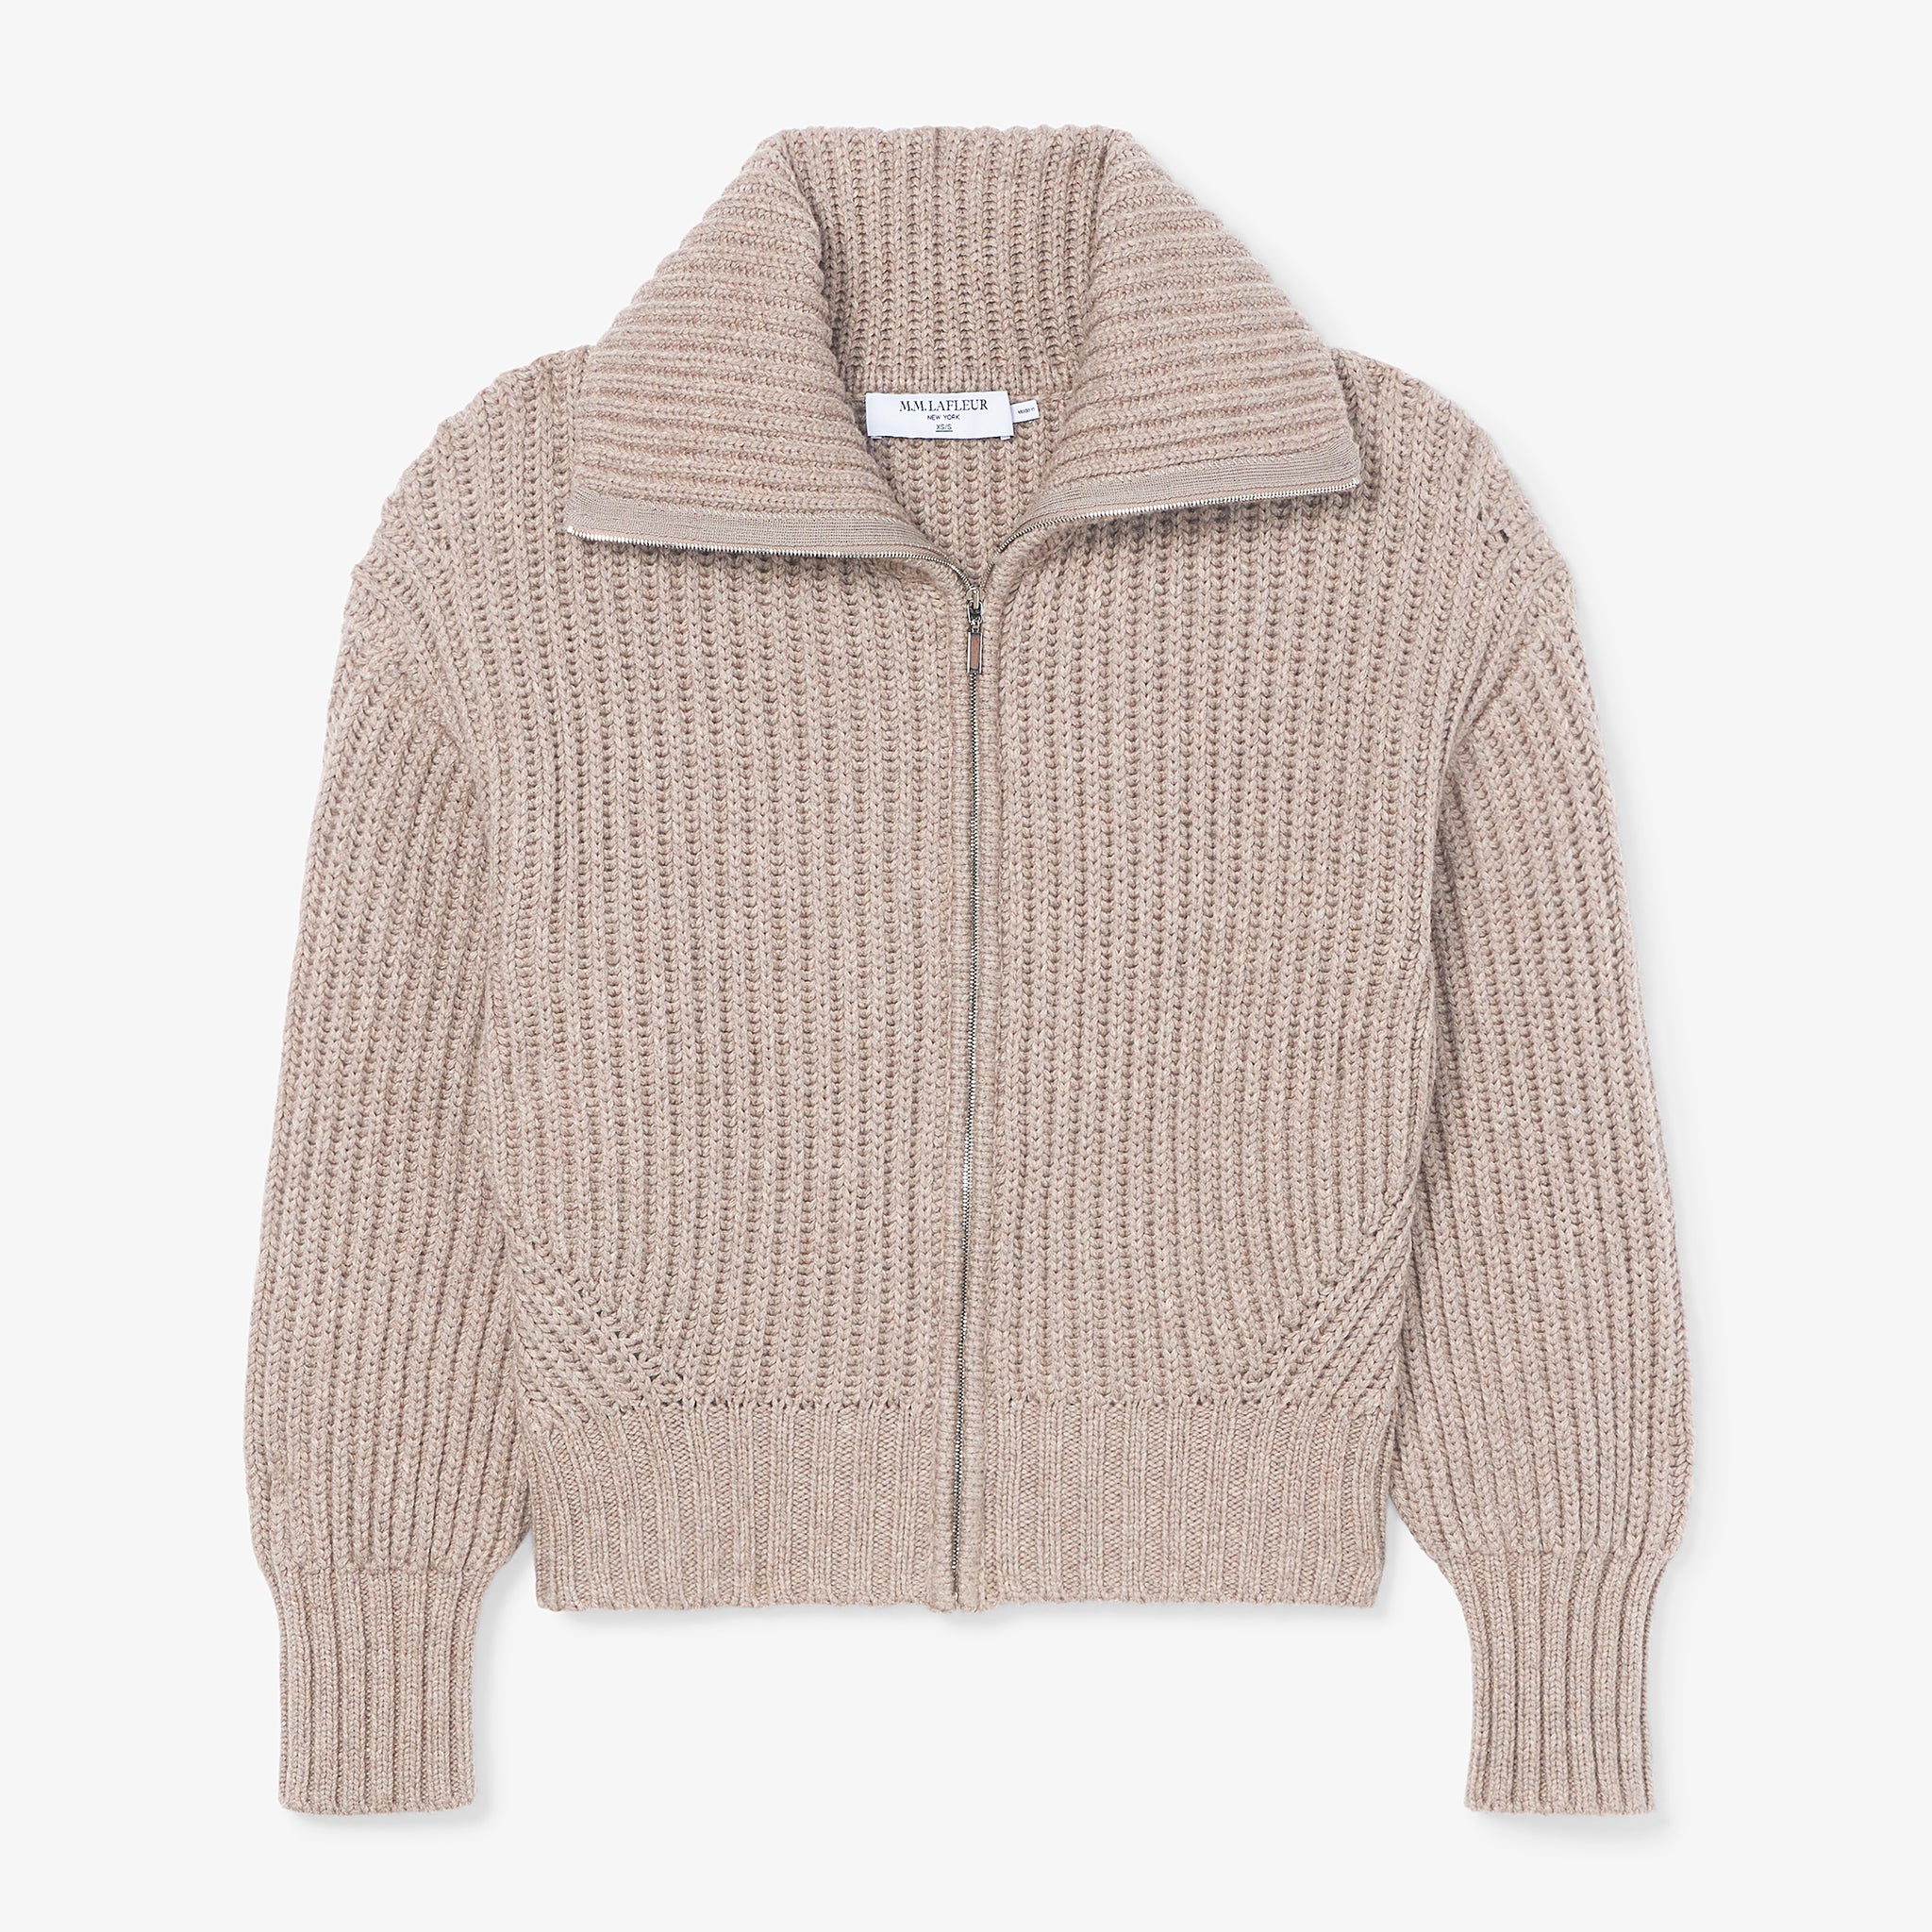 Packshot image of the william sweater in barley